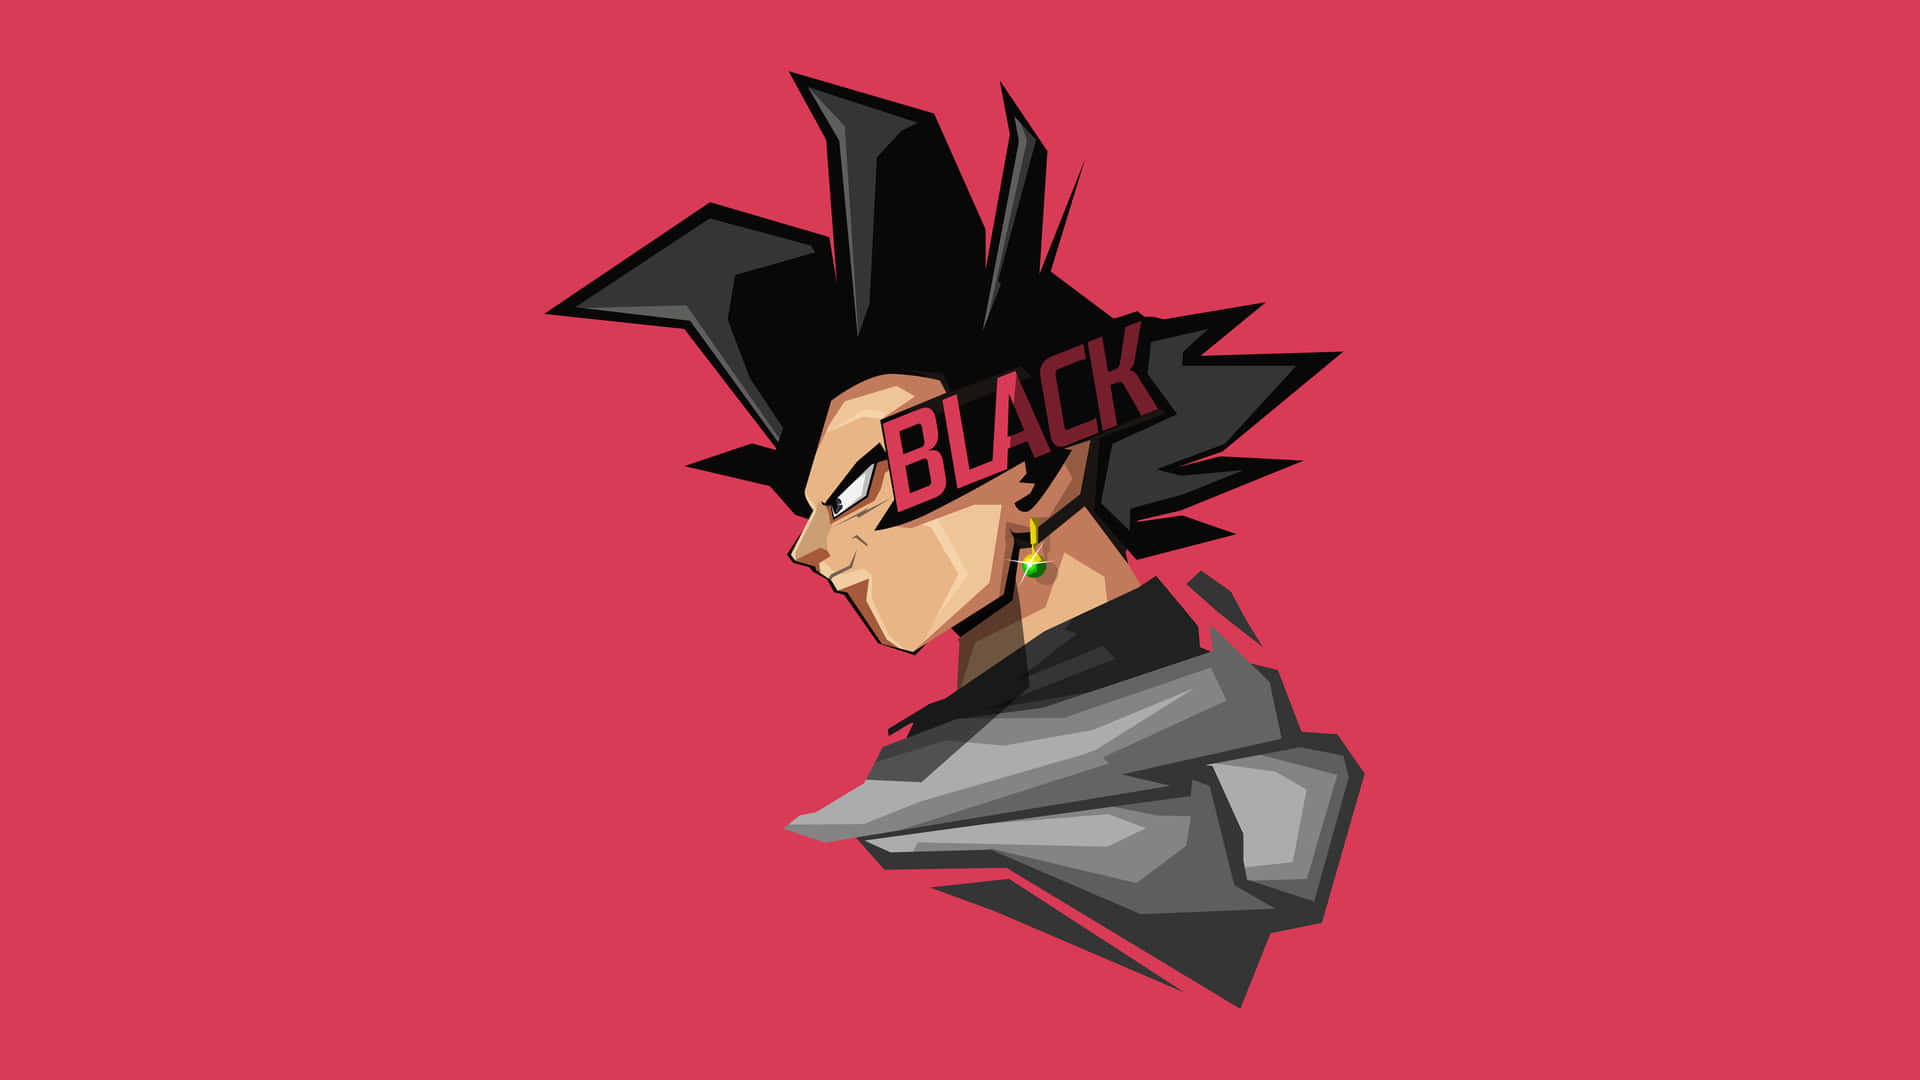 Goku Black stands ready for battle